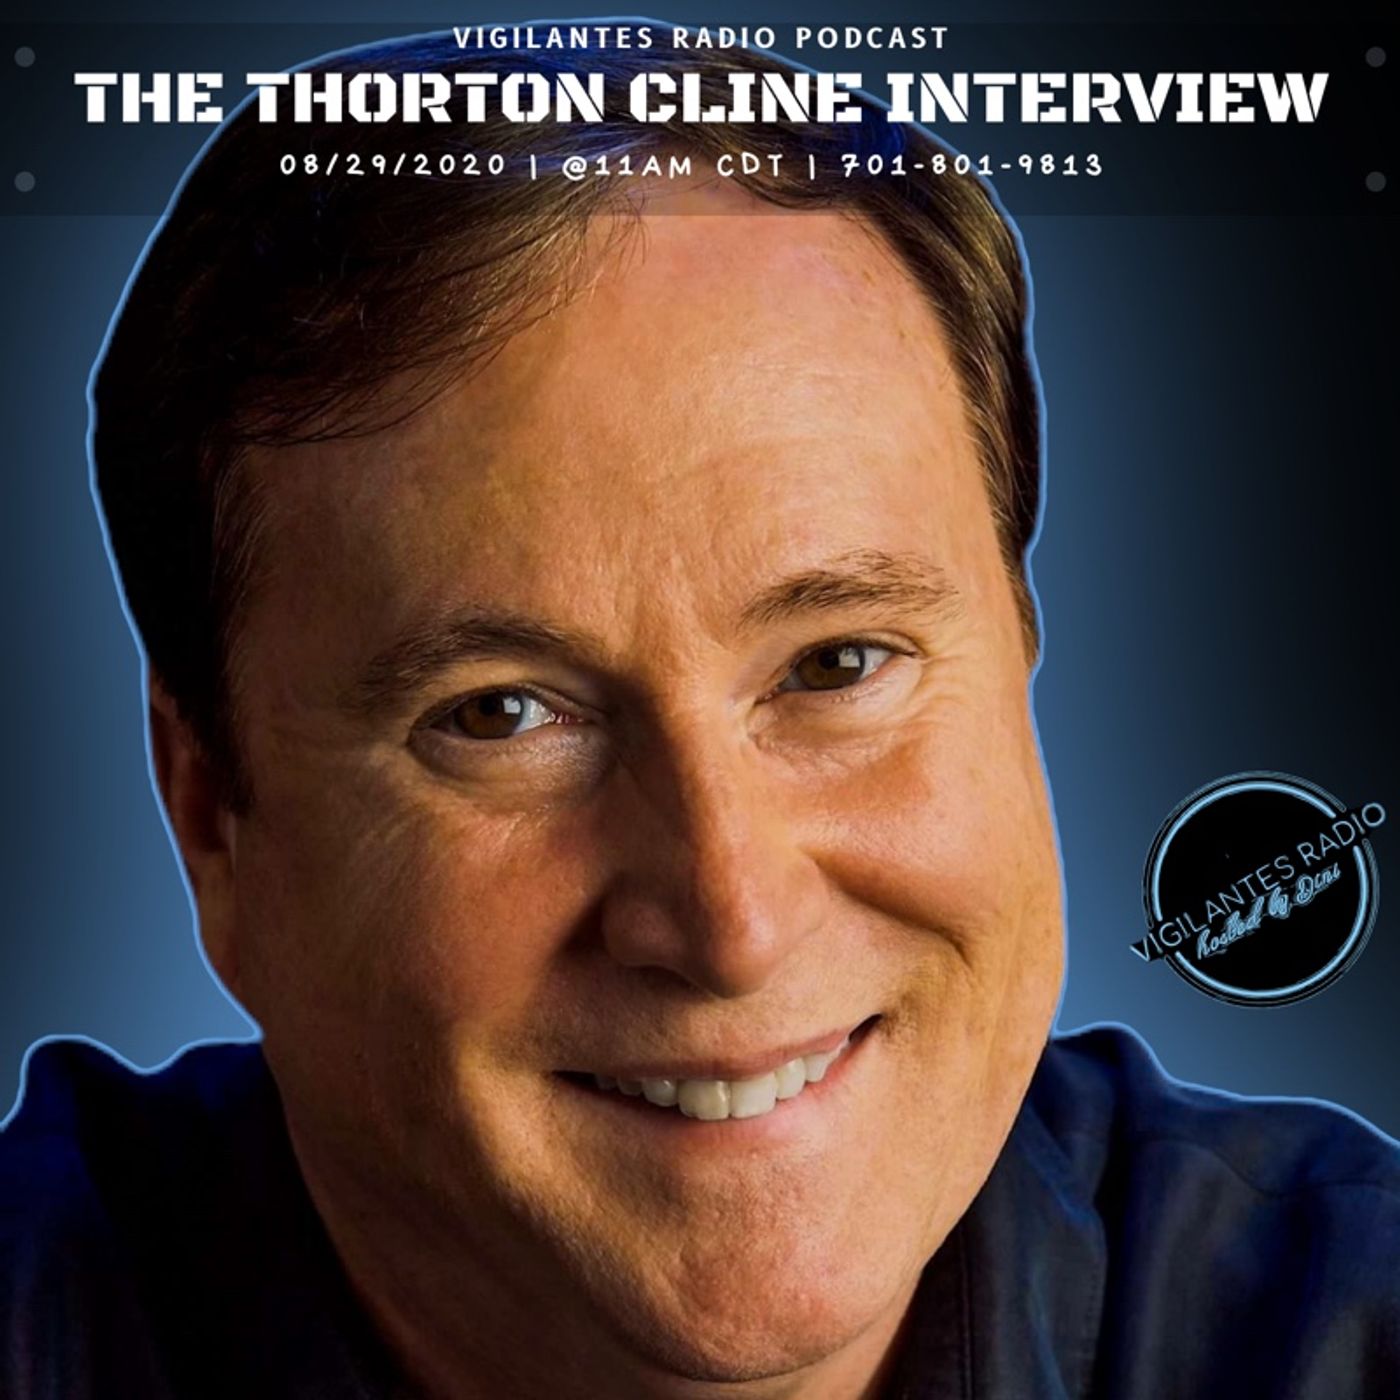 The Thorton Cline Interview. Image